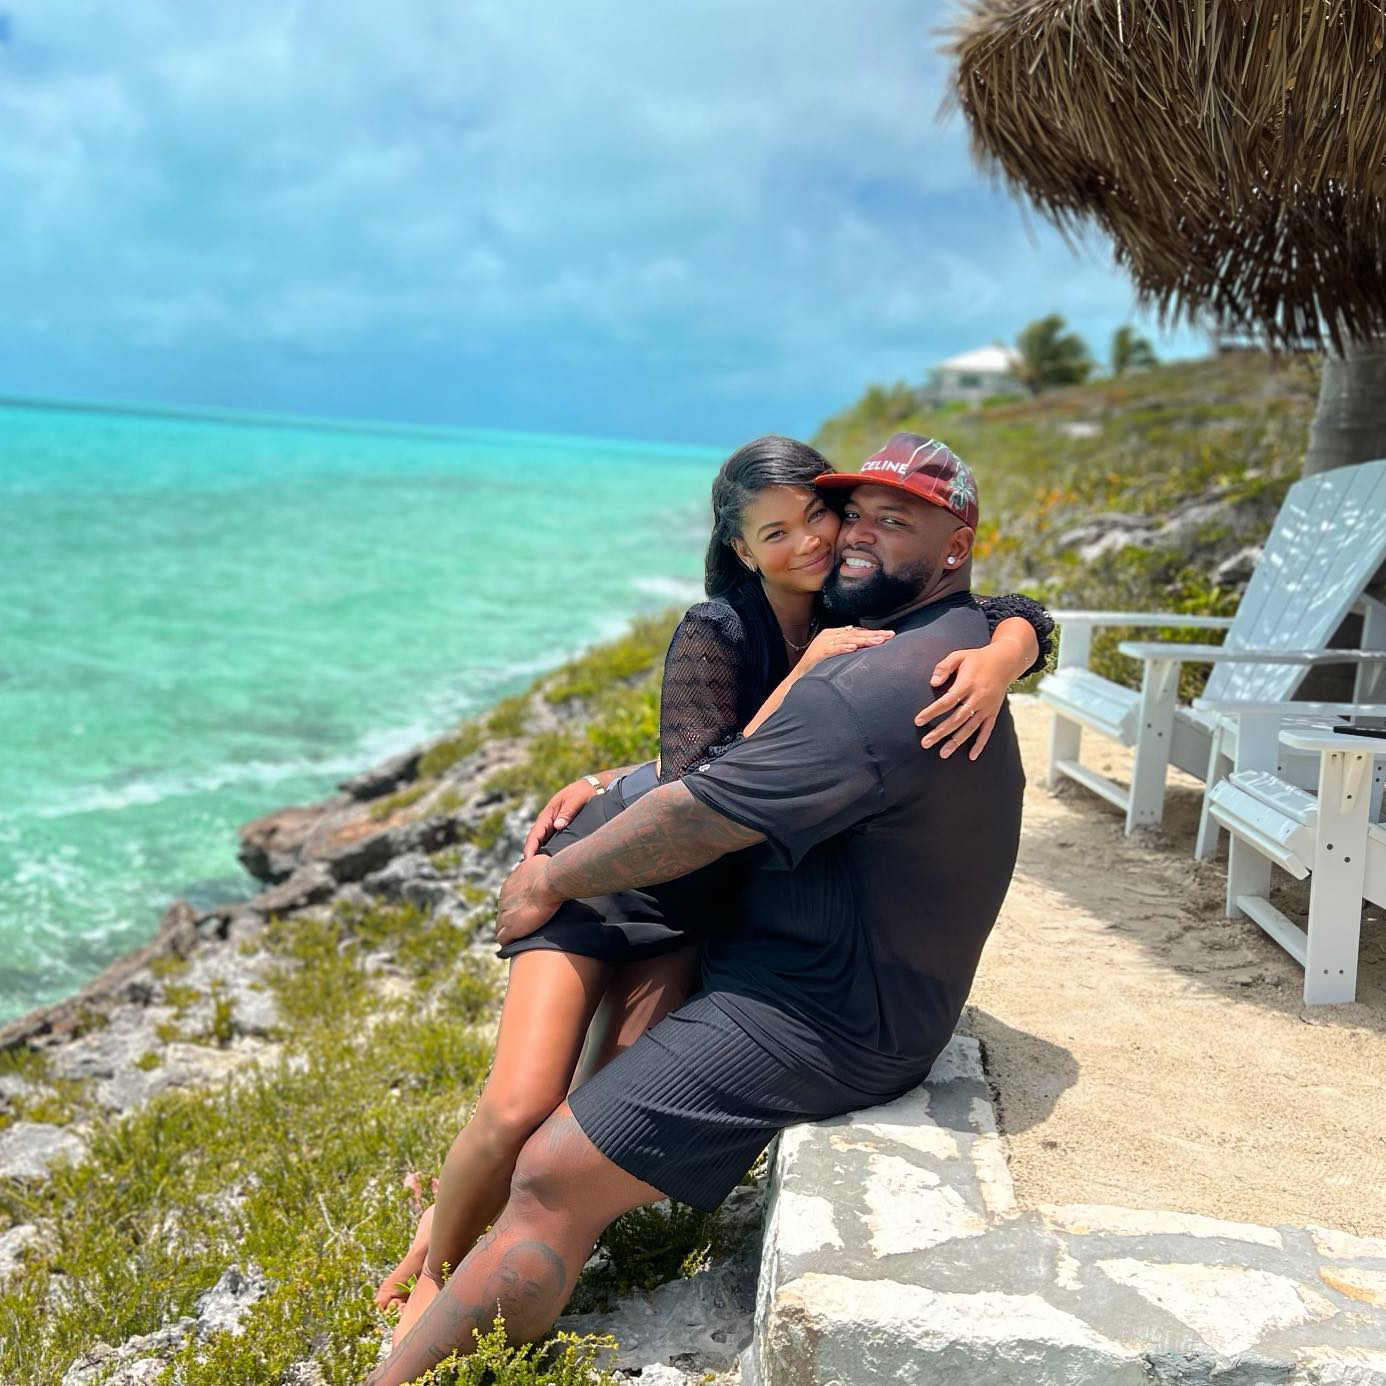 Chanel Iman and Davon Godchaux get engaged in Italy